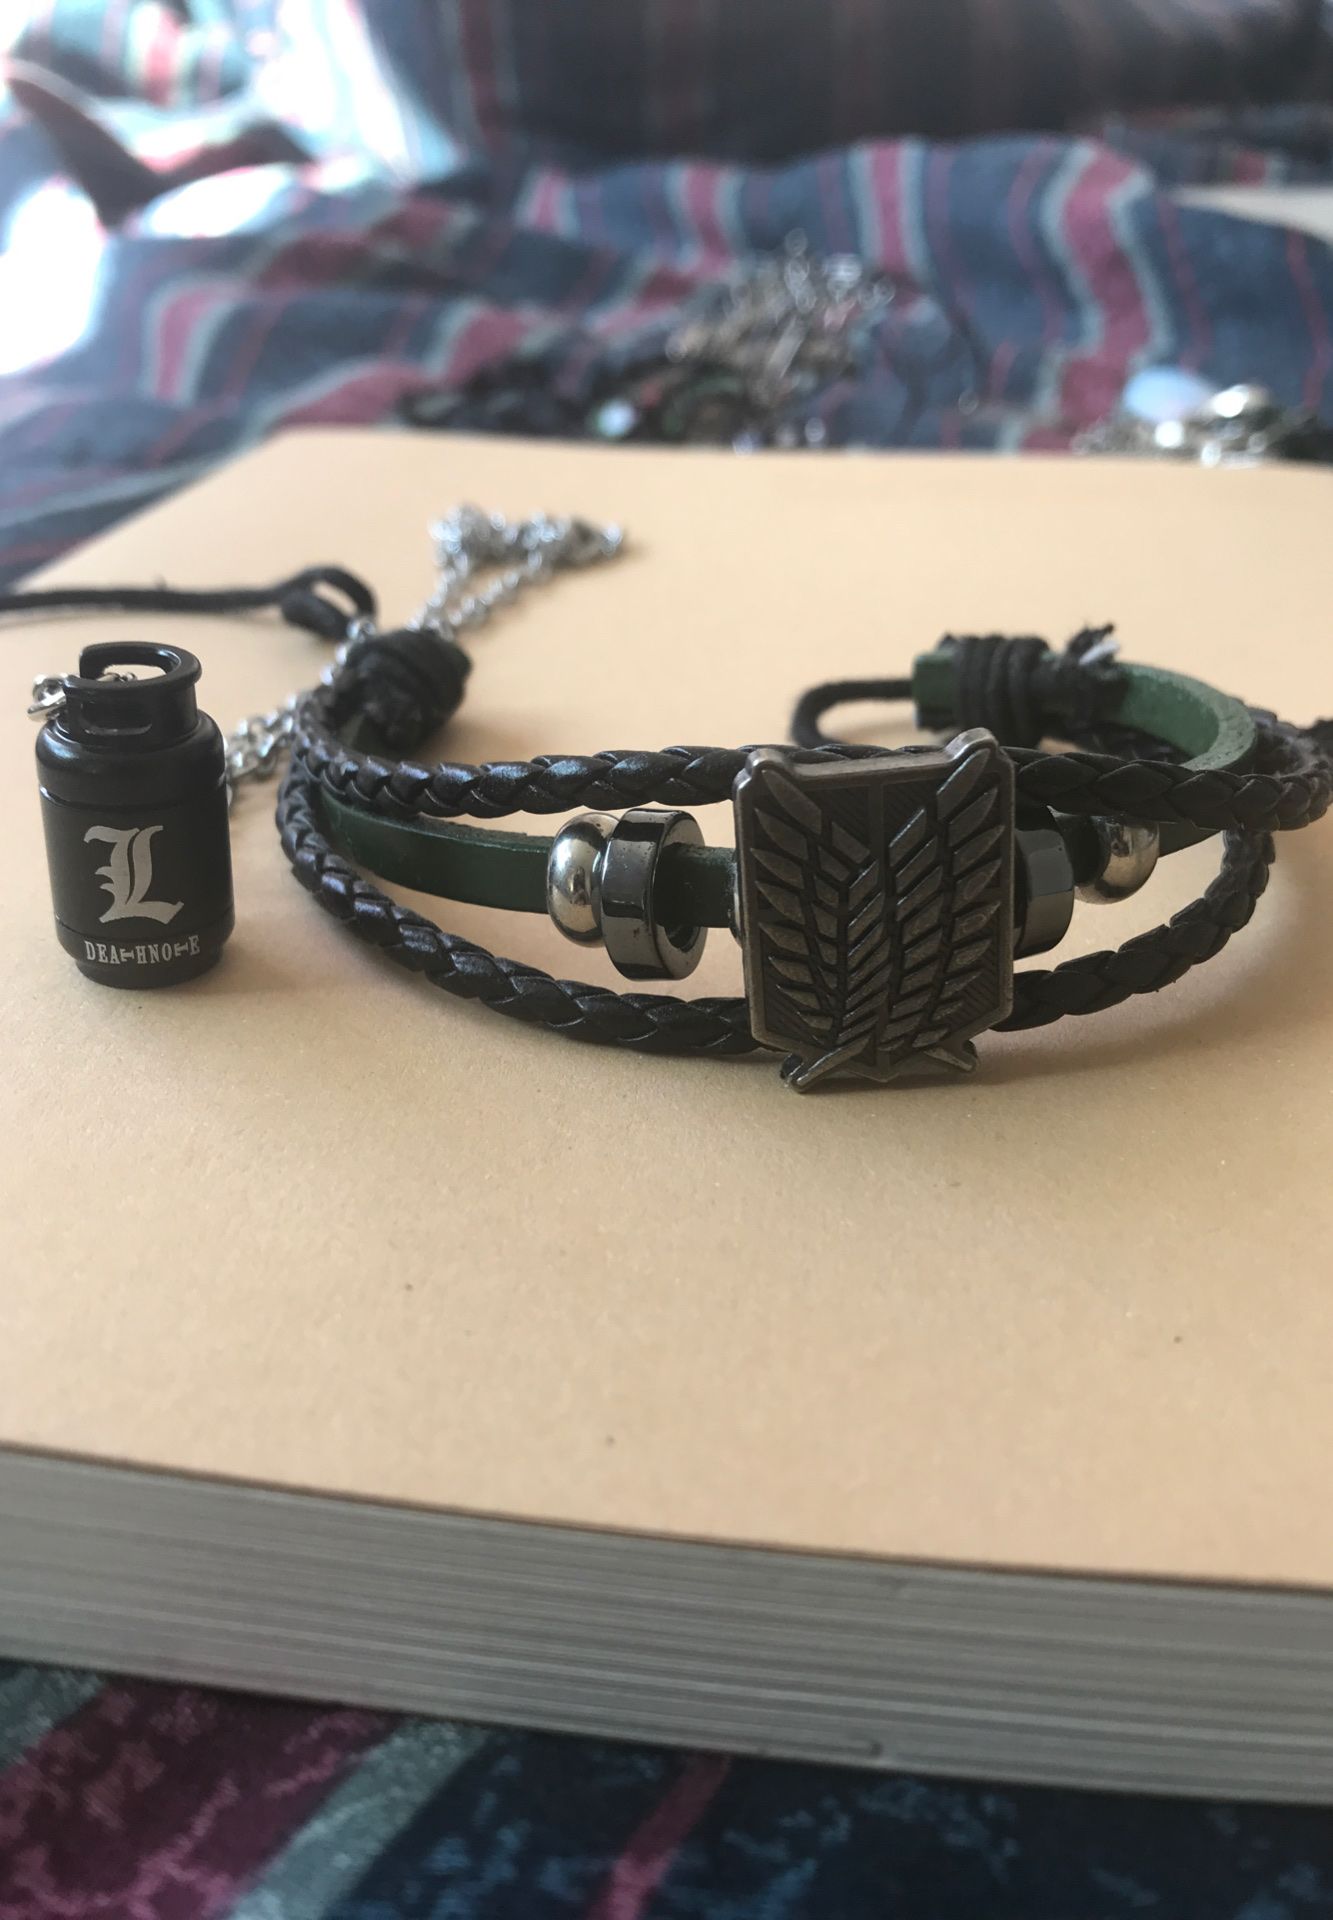 Free death note and attack on titan jewelry